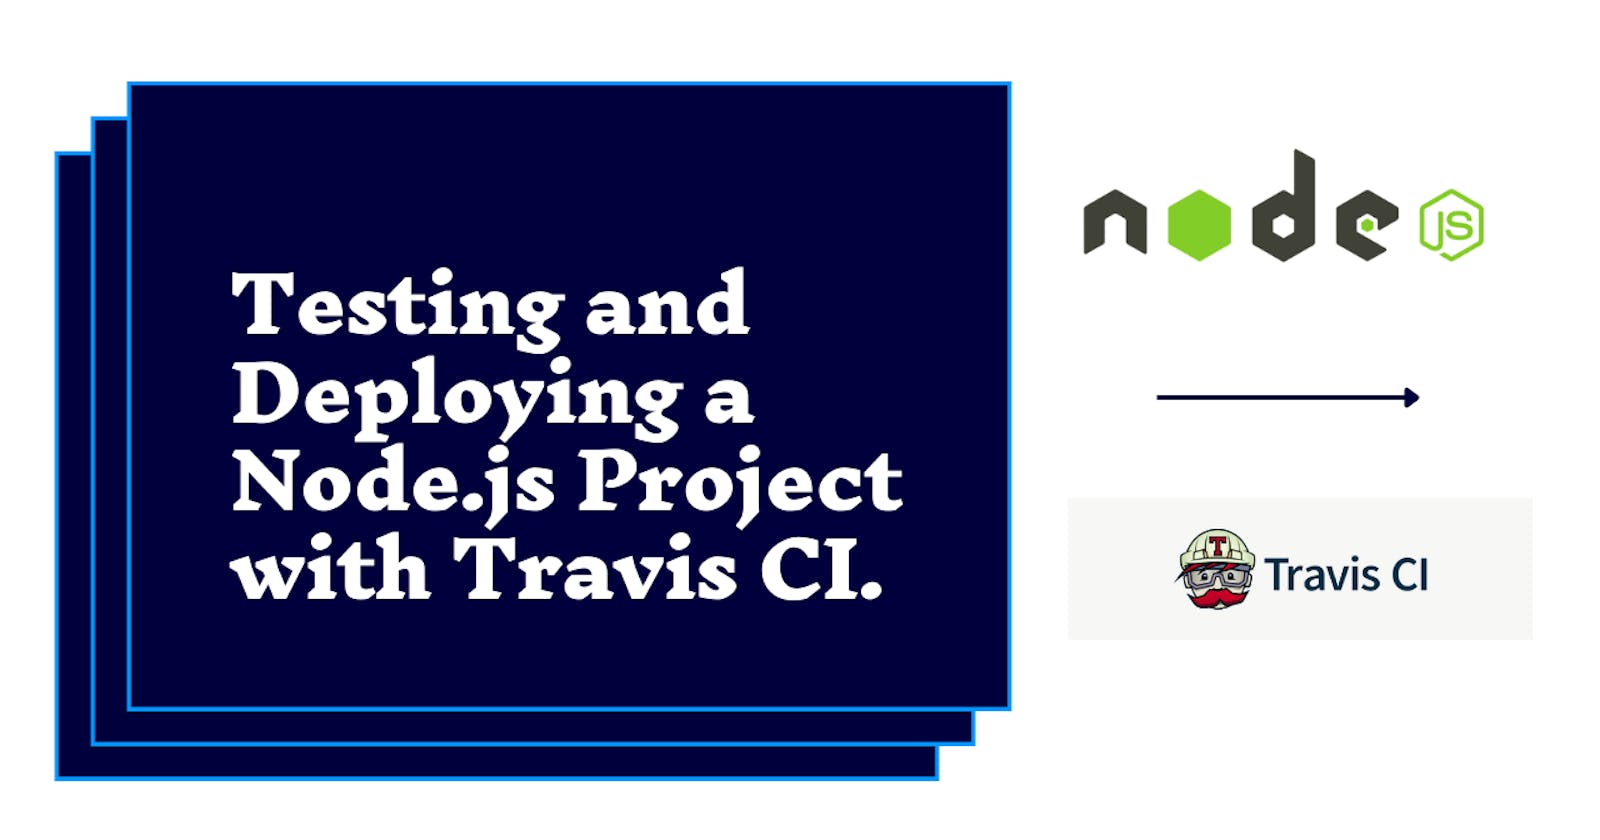 Testing and Deploying a Node.js Project with Travis CI